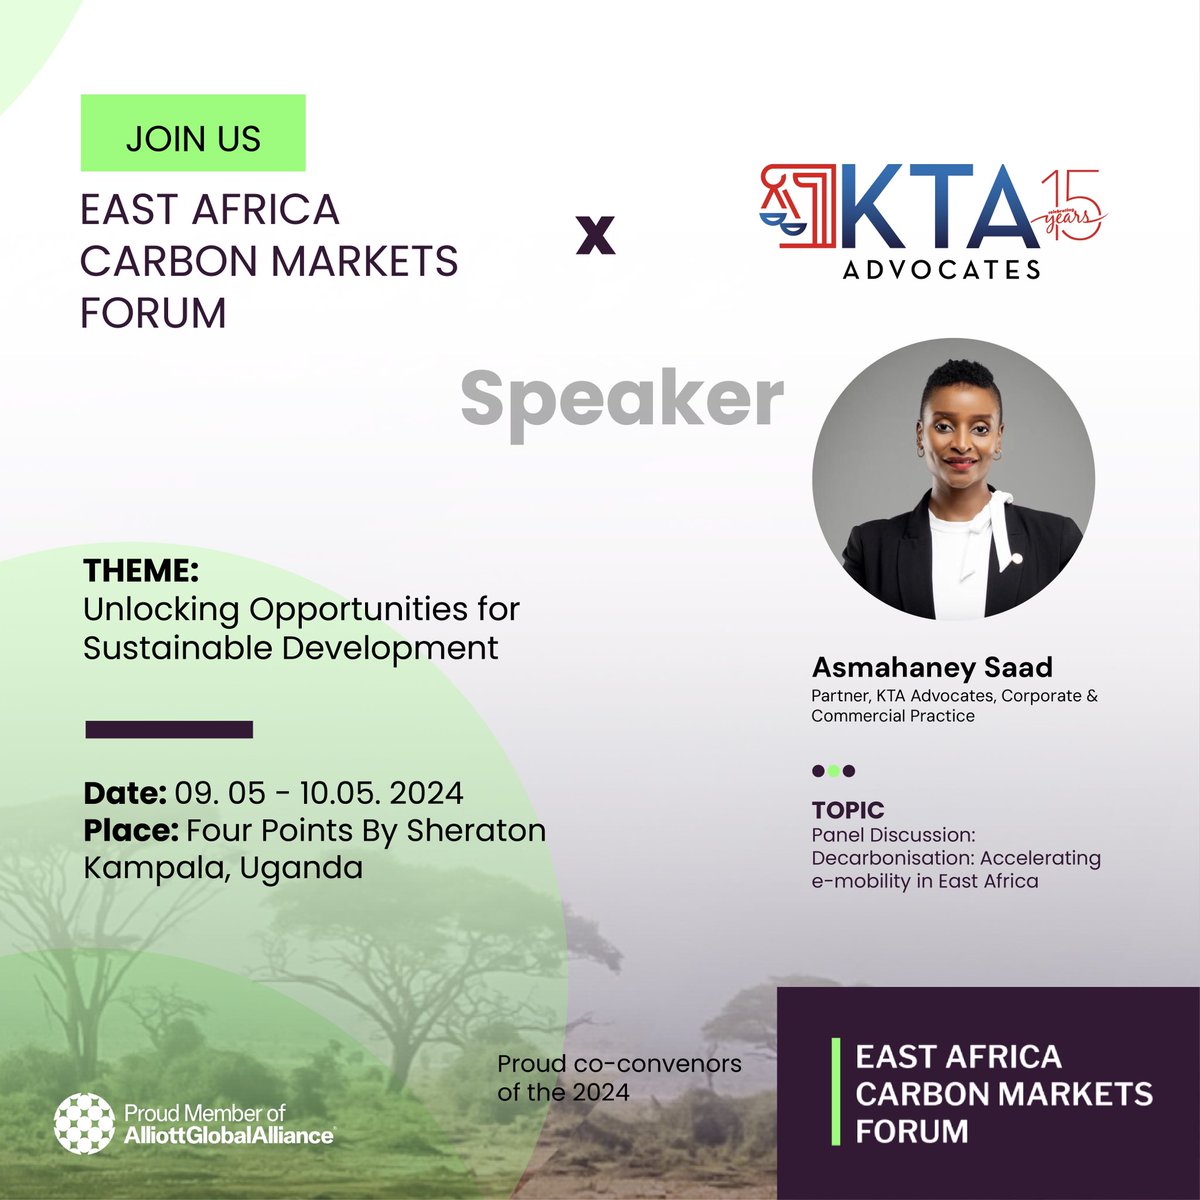 We’re pleased to have @asmahaney12 
with unmatched expertise in Corporate and Commercial Practice, analyze decarbonisation and accelerating e-mobility in East Africa at the @EAcarbonmarkets event. Don't miss these insights.

#KTAat15 #EACMF2024 #EastAfricaCarbonMarketsForum